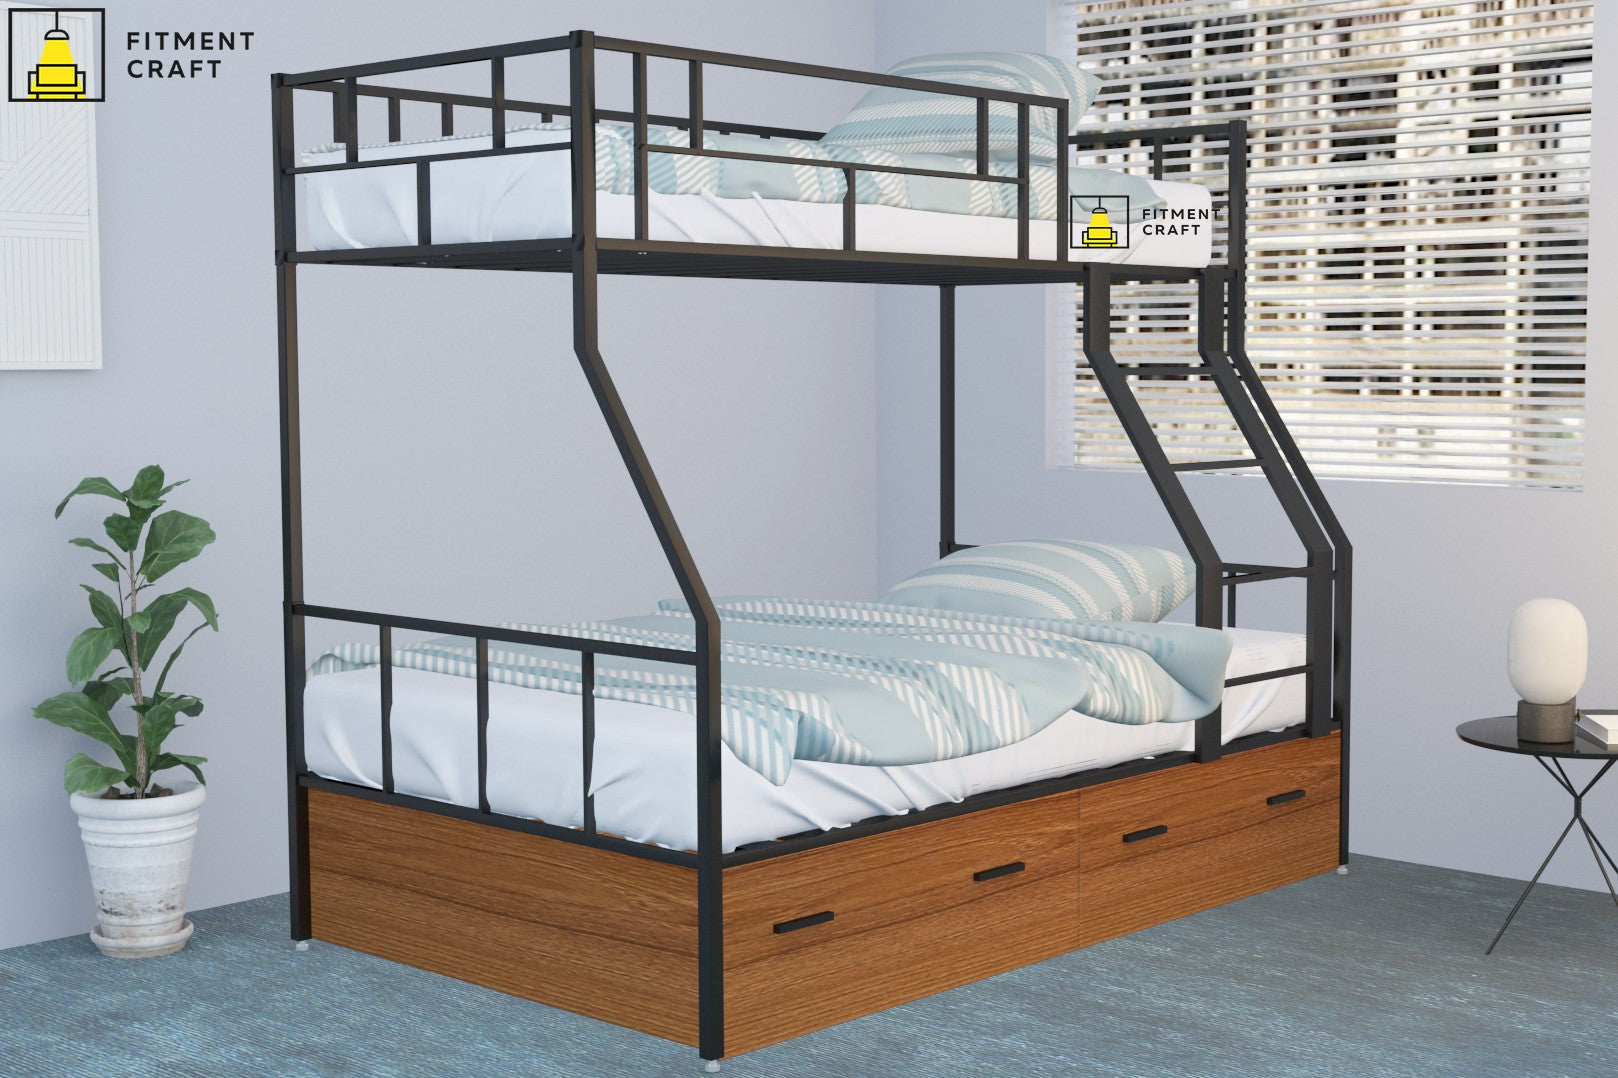 New FC Bunk Bed with Drawer | MBV3-004